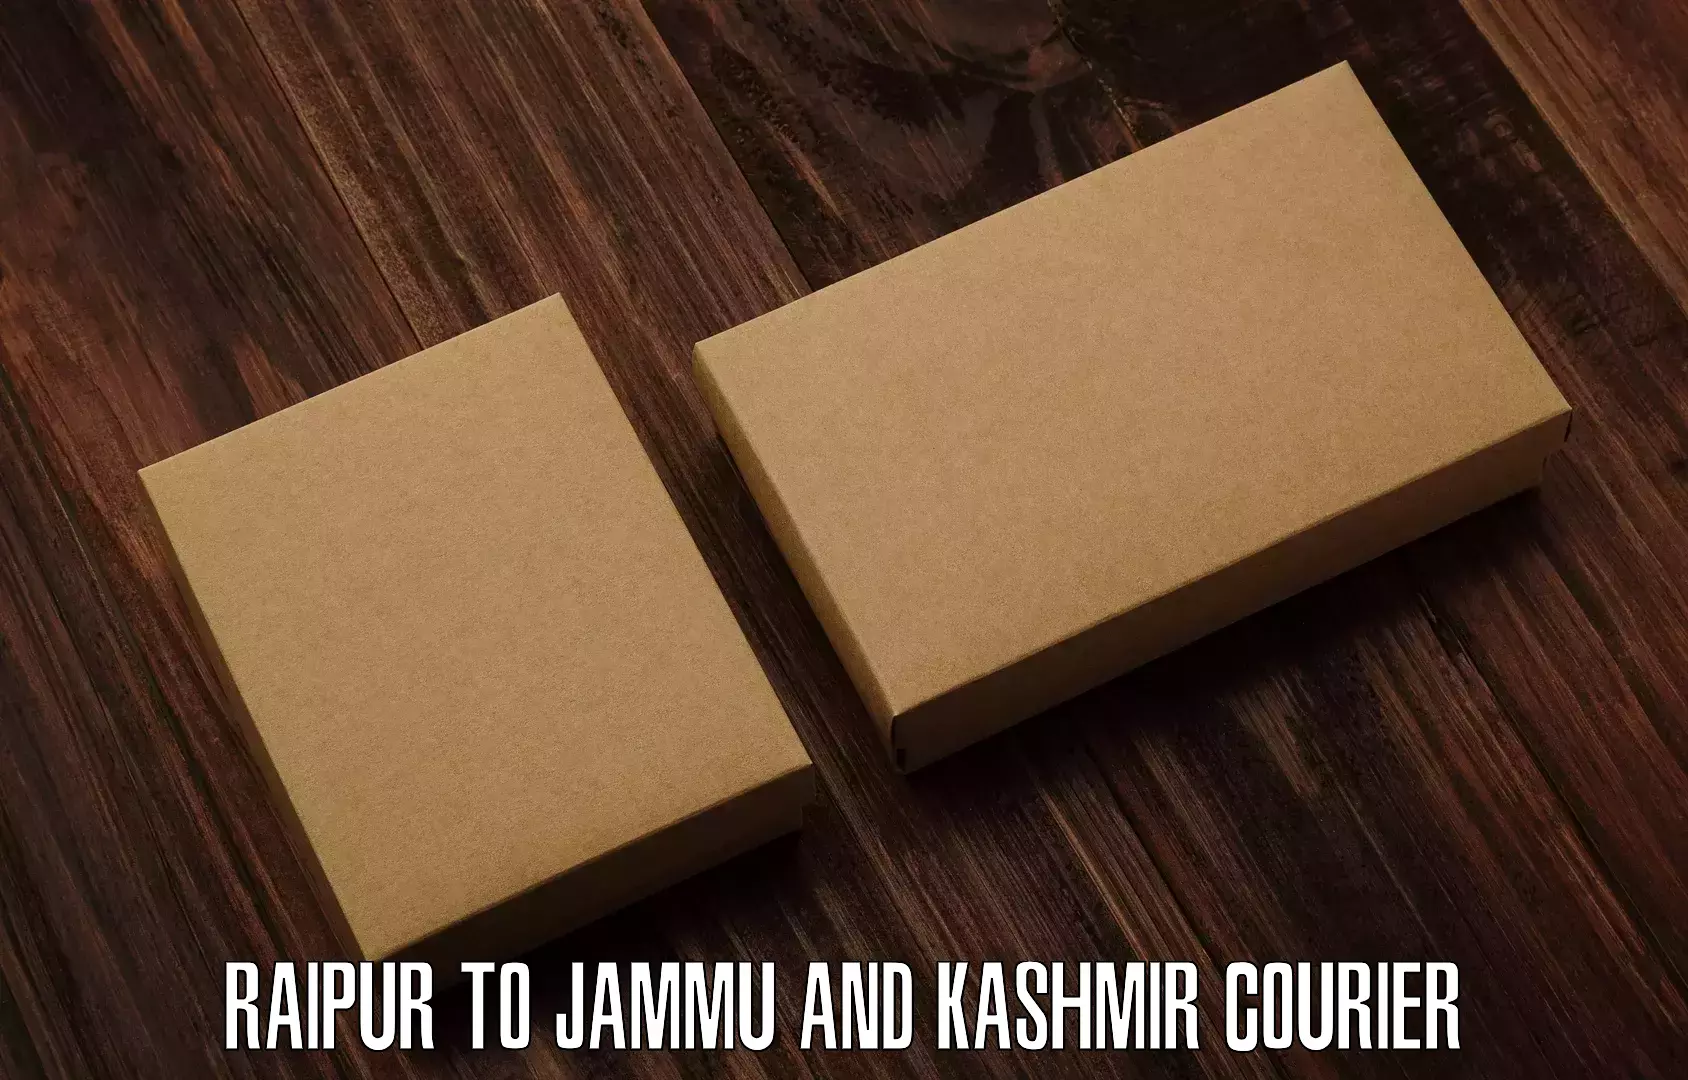 Package delivery network Raipur to Jammu